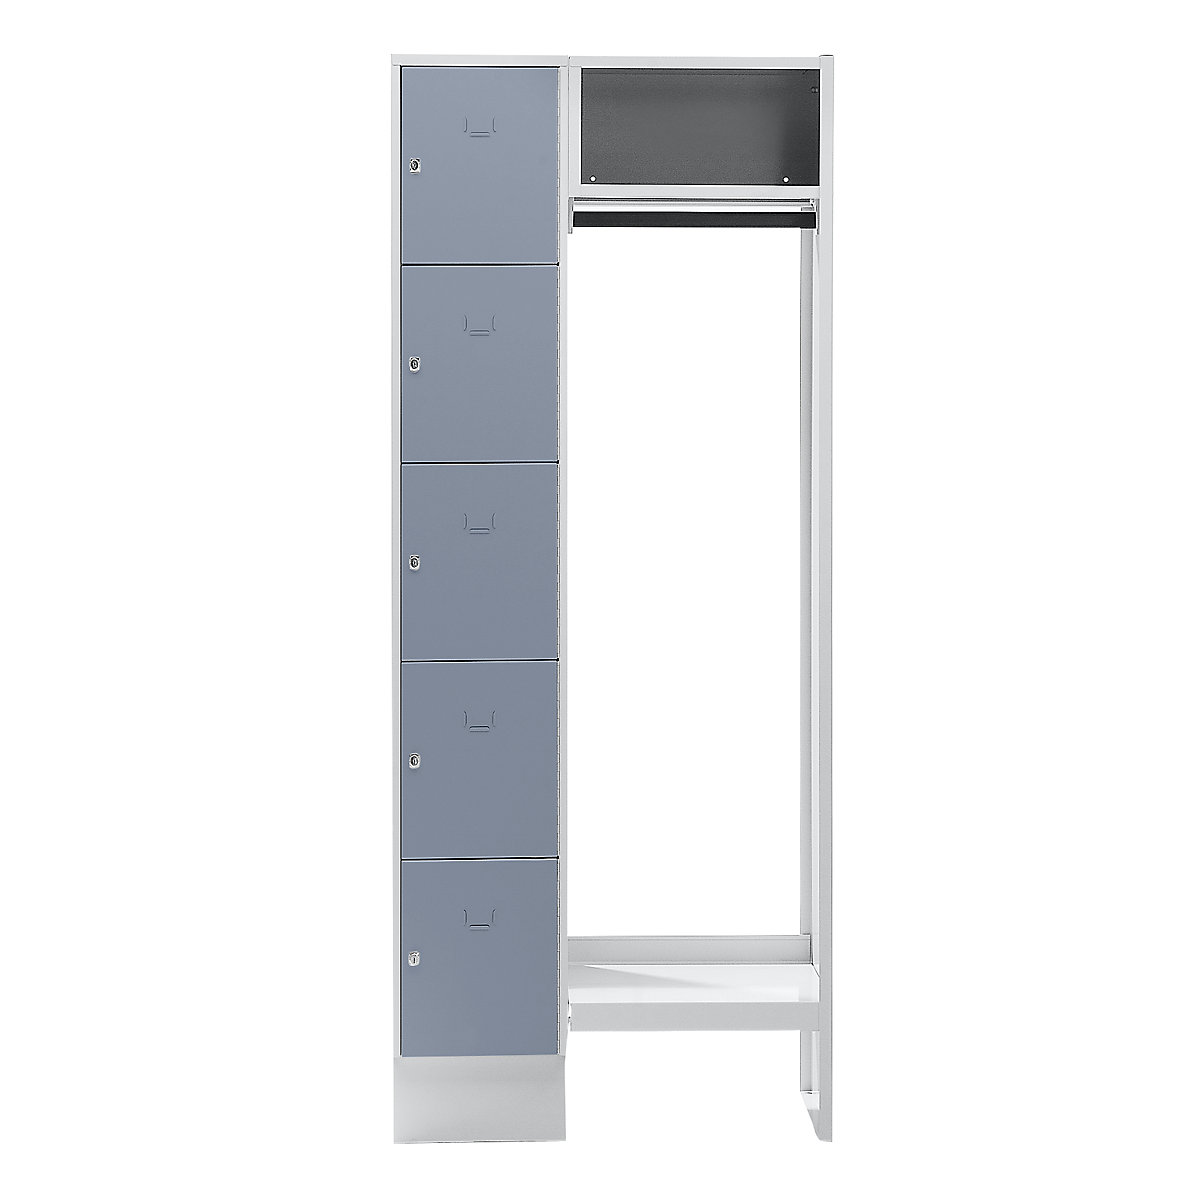 Cloakroom locker system – Wolf, 5 compartments on left, 5 coat hangers, overall width 750 mm, compartment width 298 mm, silver grey/light grey-16